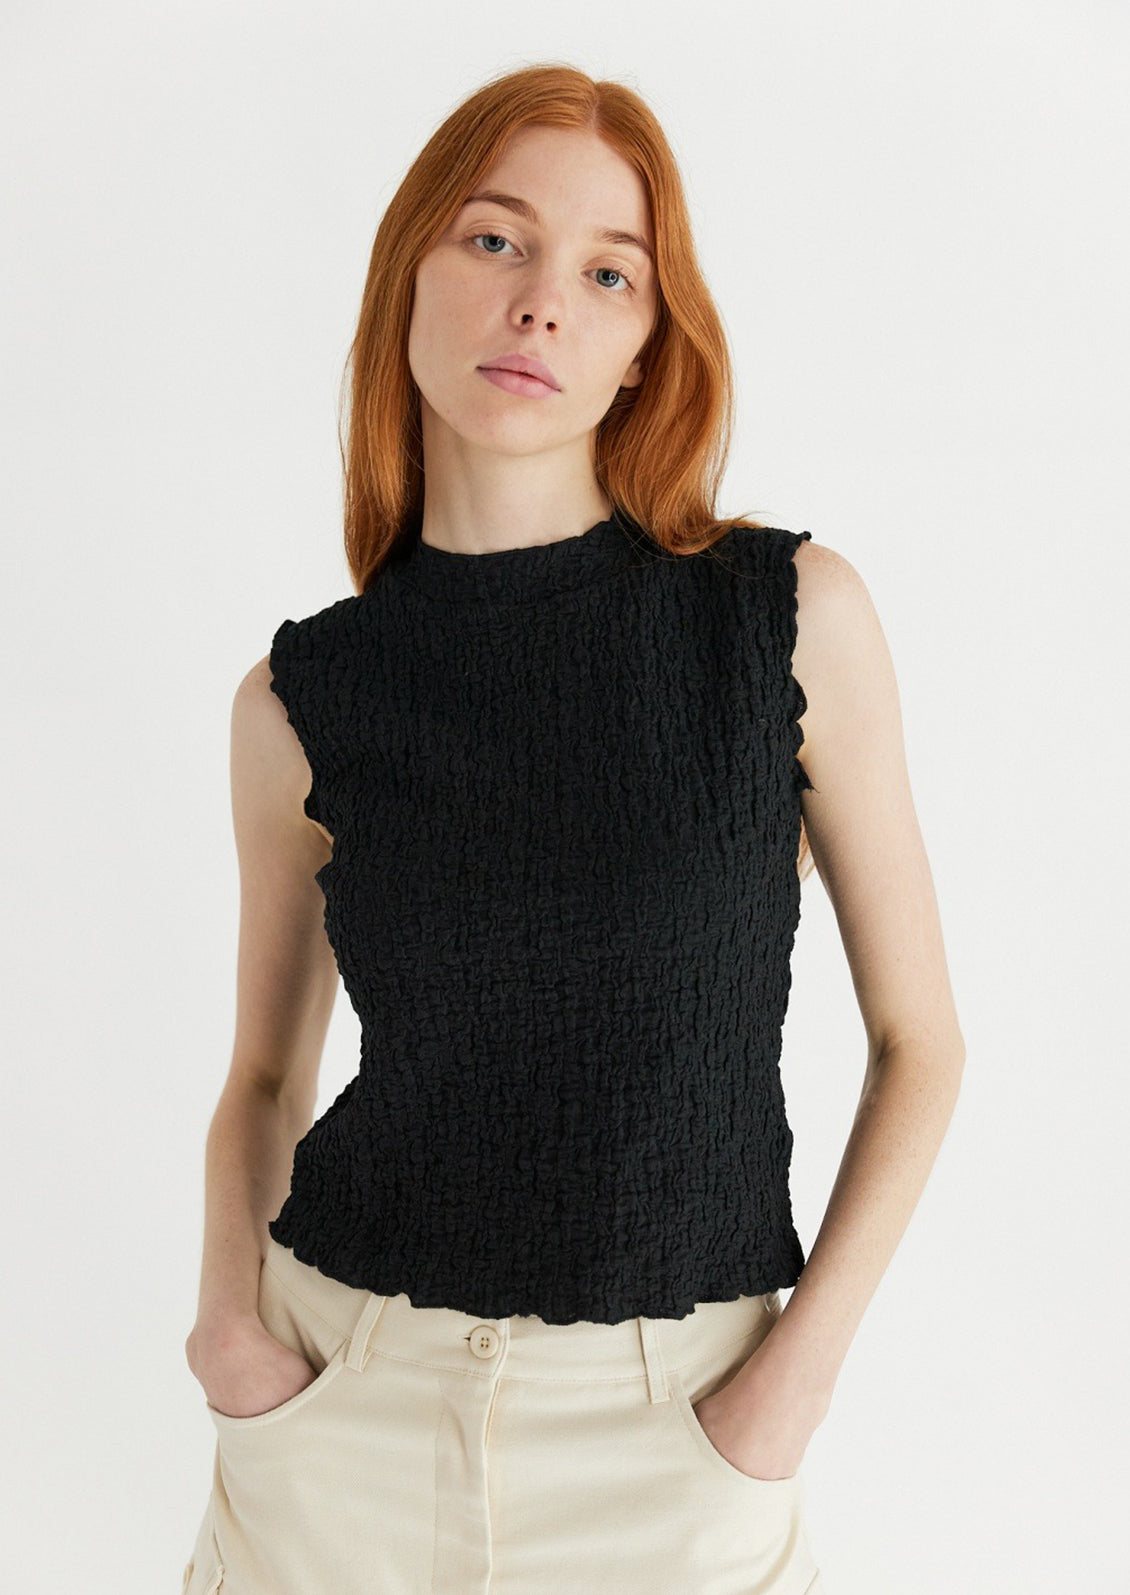 A woman wearing a sleeveless black top with crinkled texture.